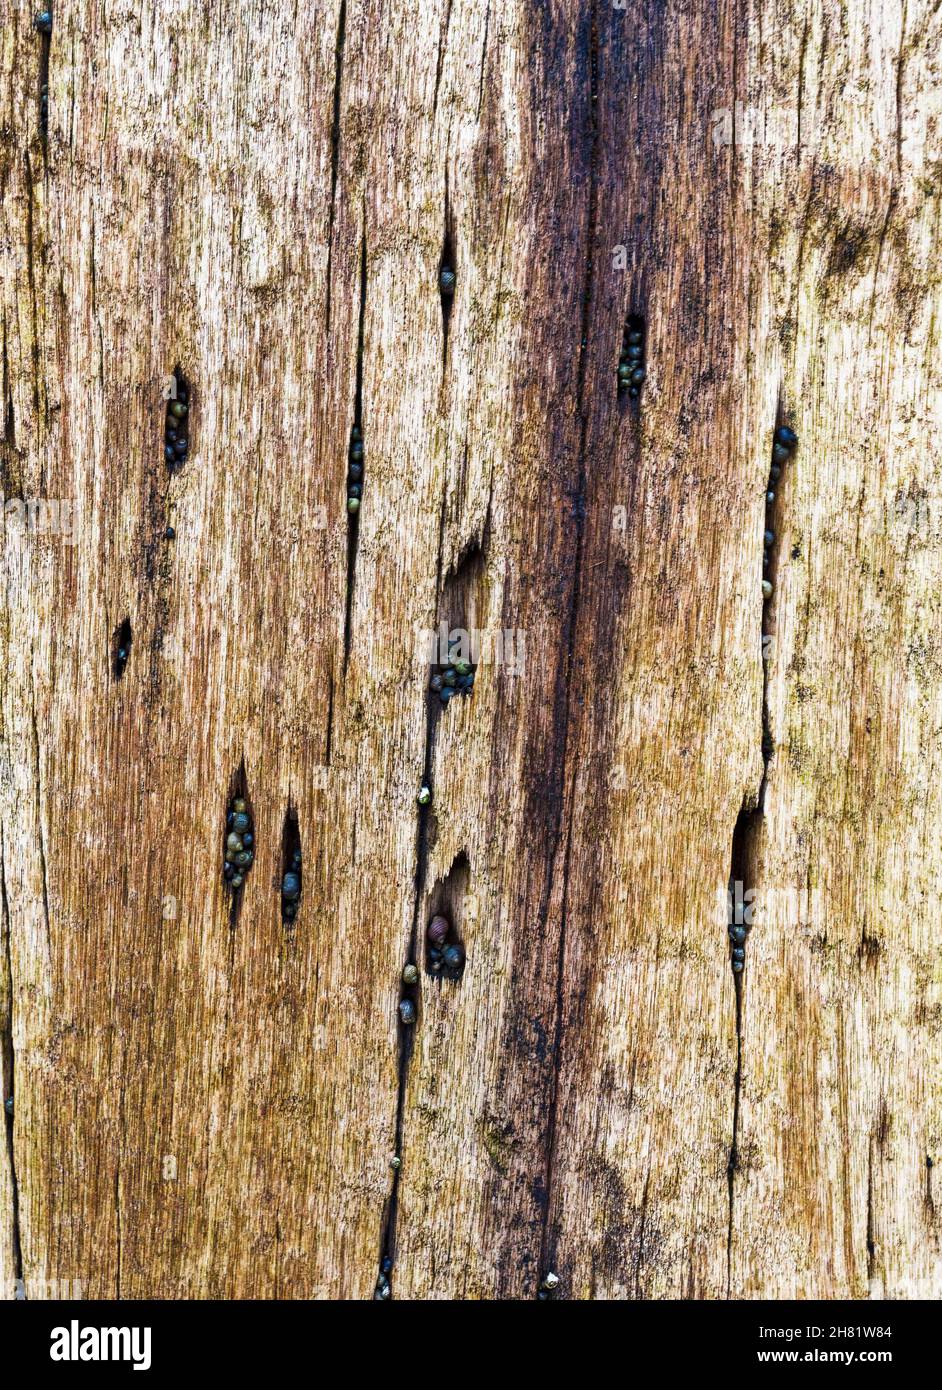 Old wooden groyne at Cambois beach in Northumberland UK, detail of wood grain. Stock Photo